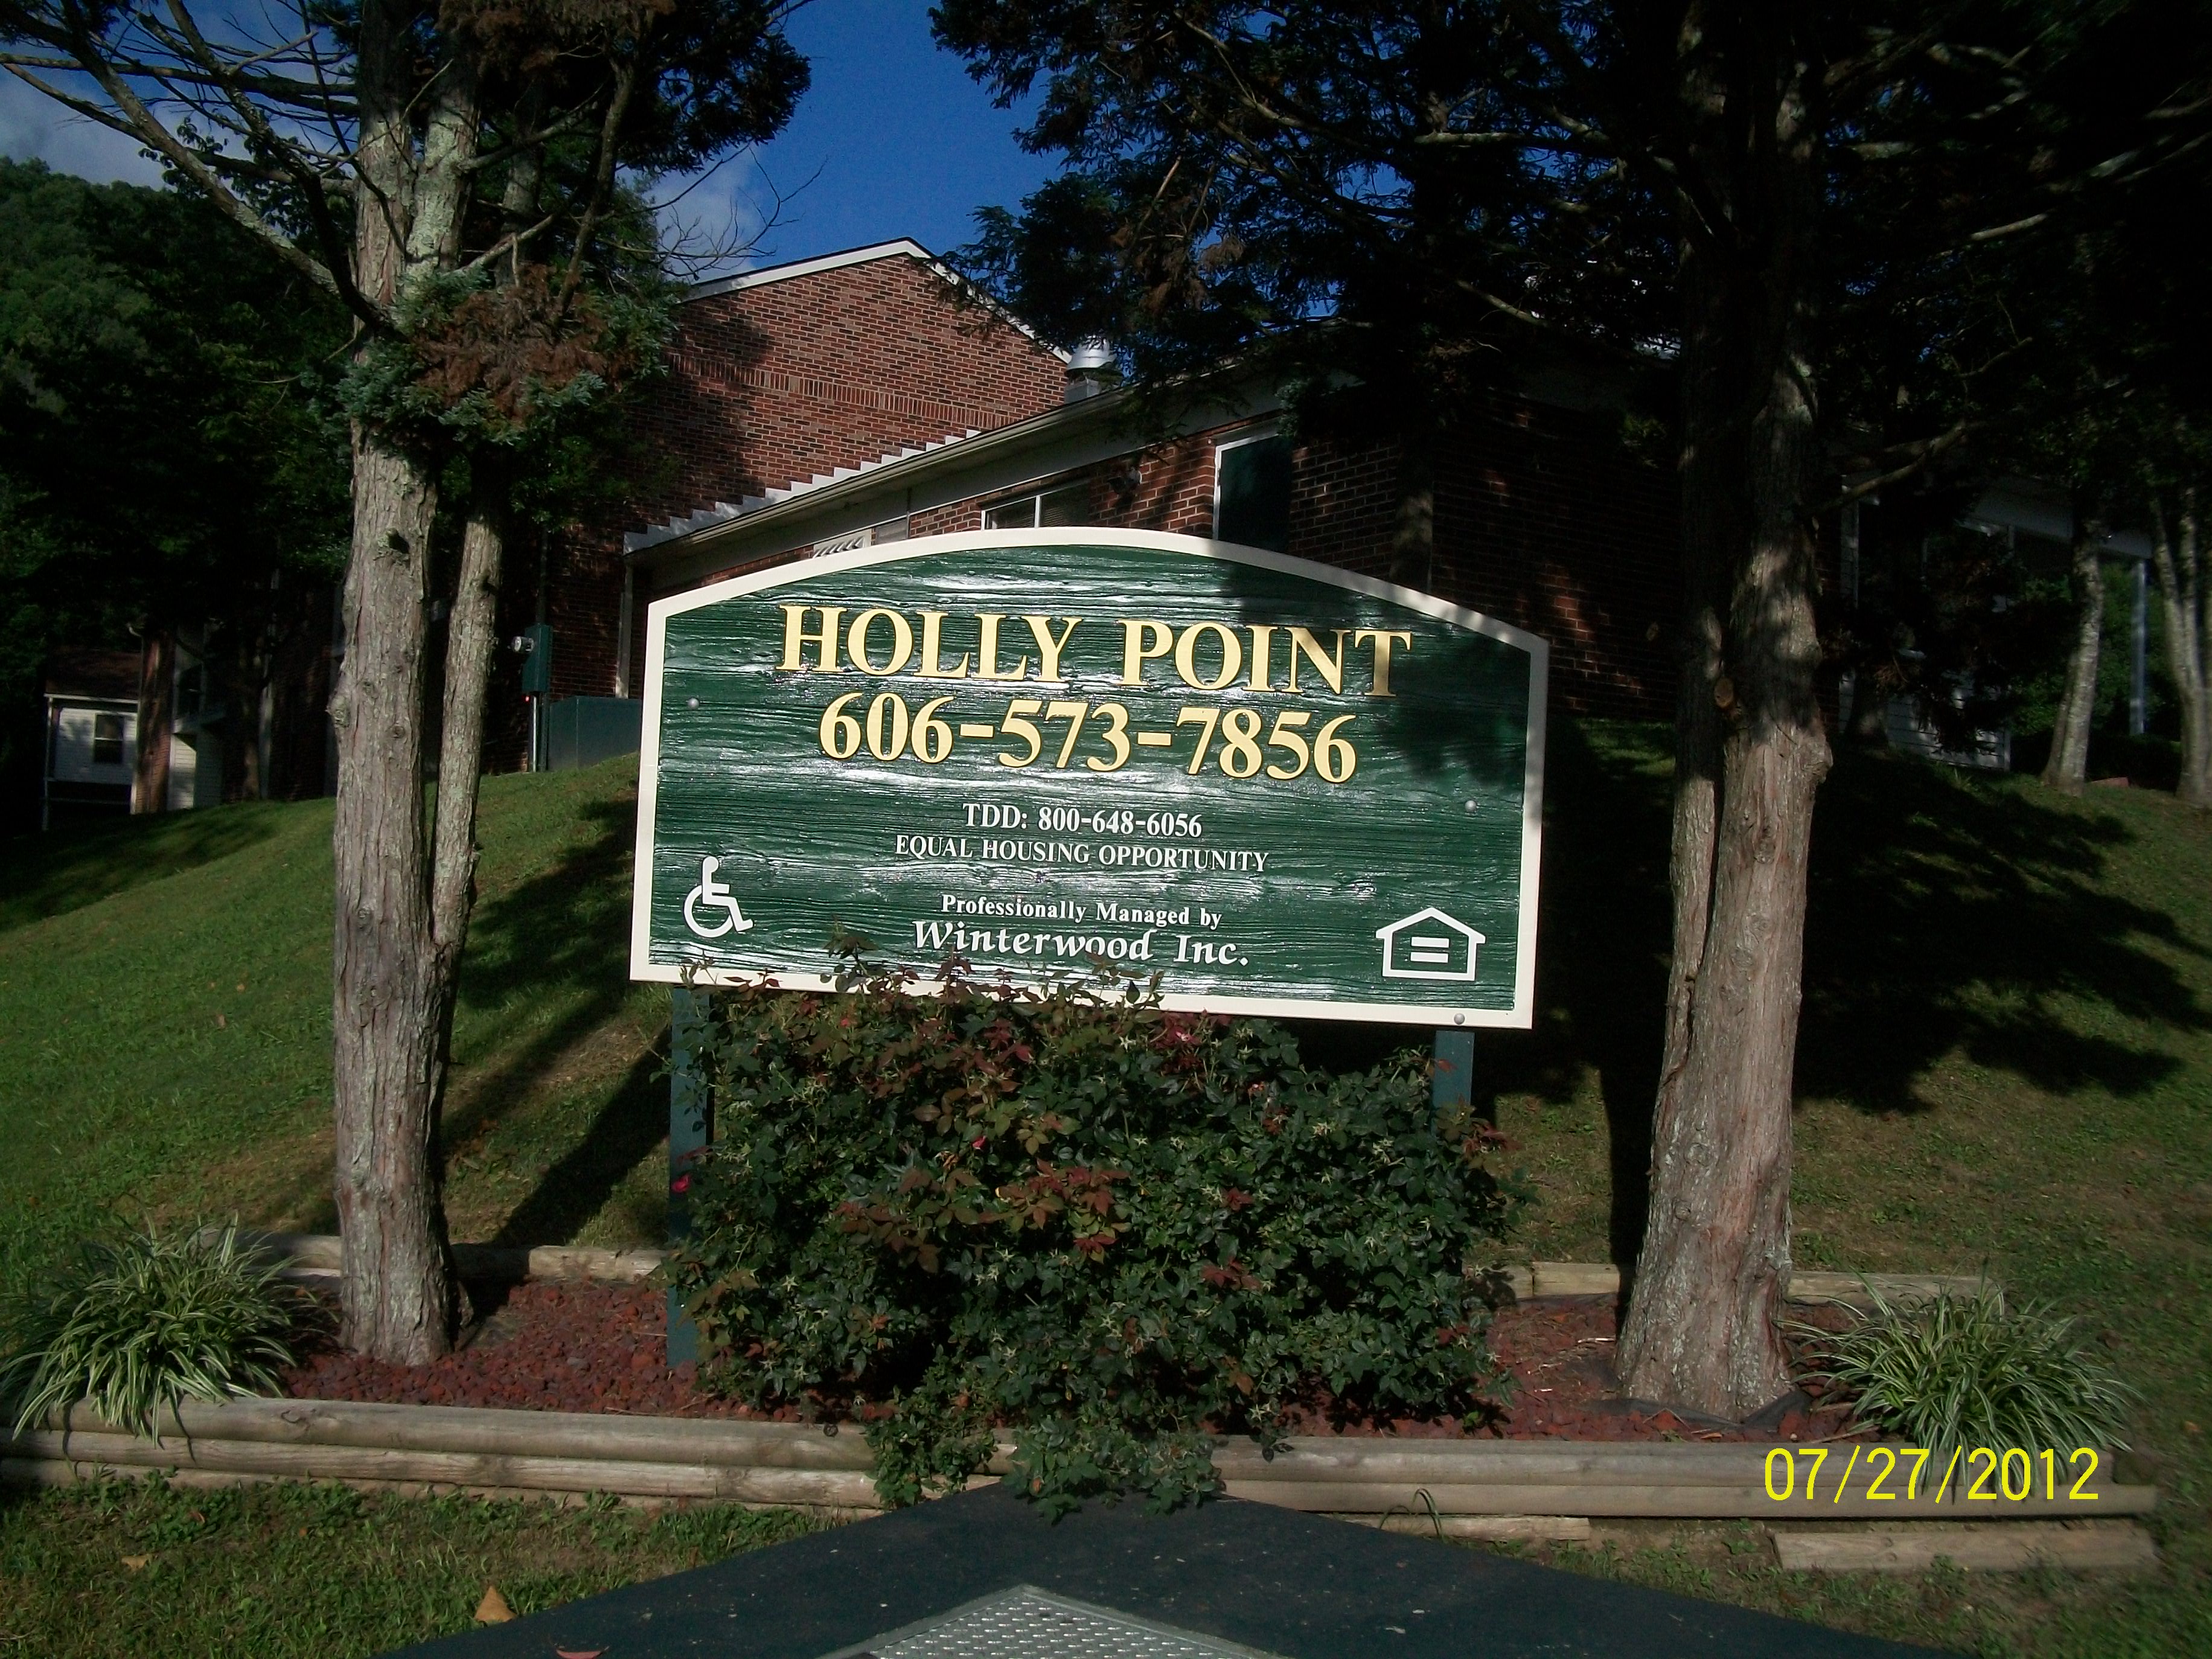 HOLLY POINT APARTMENTS